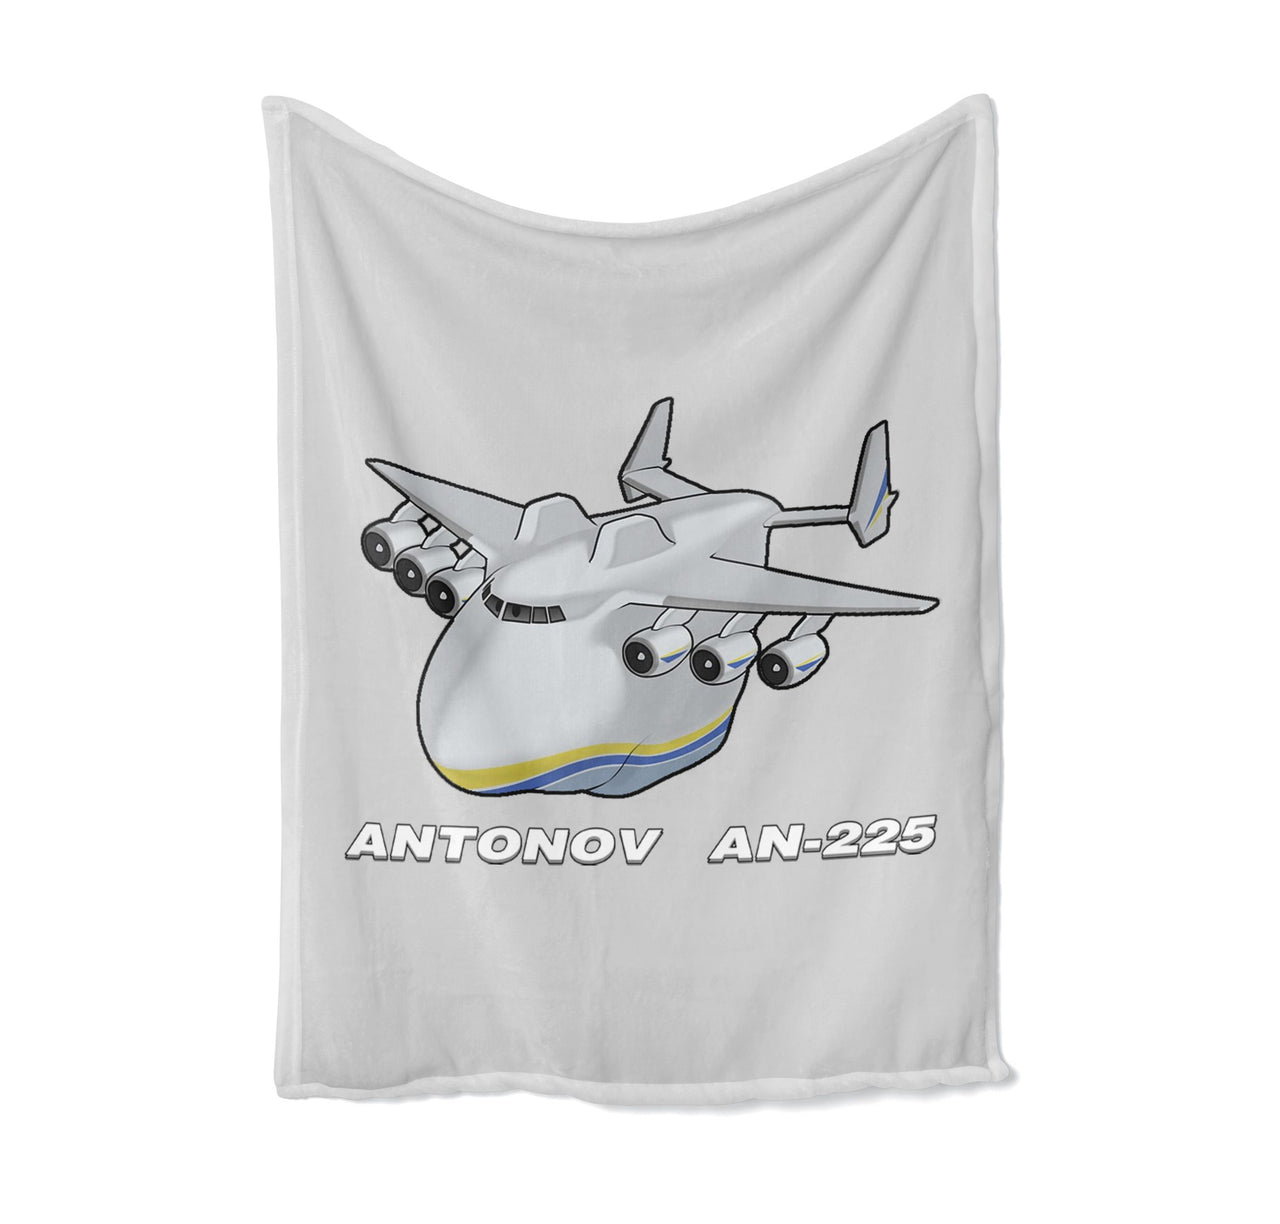 Antonov AN-225 (29) Designed Bed Blankets & Covers